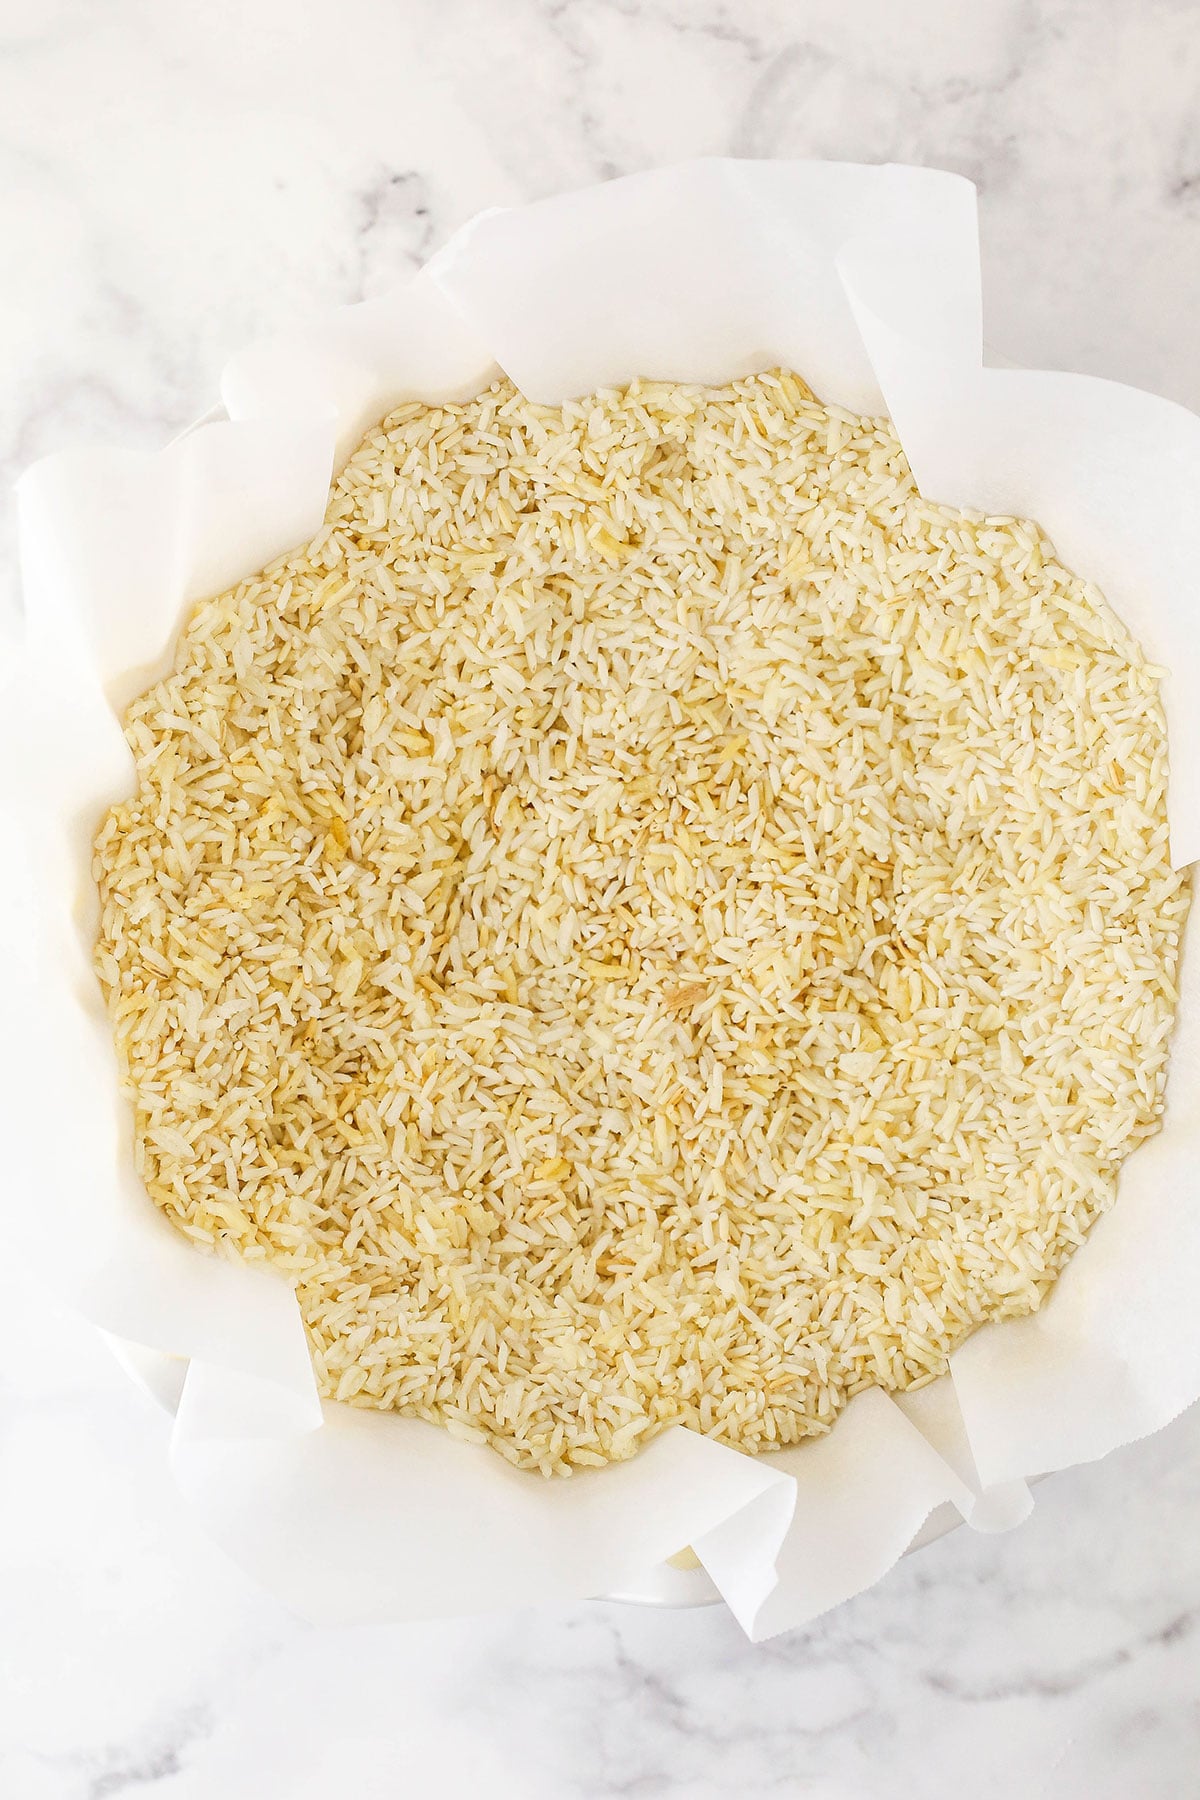 overhead image of rice within the parchment paper in a pie plate